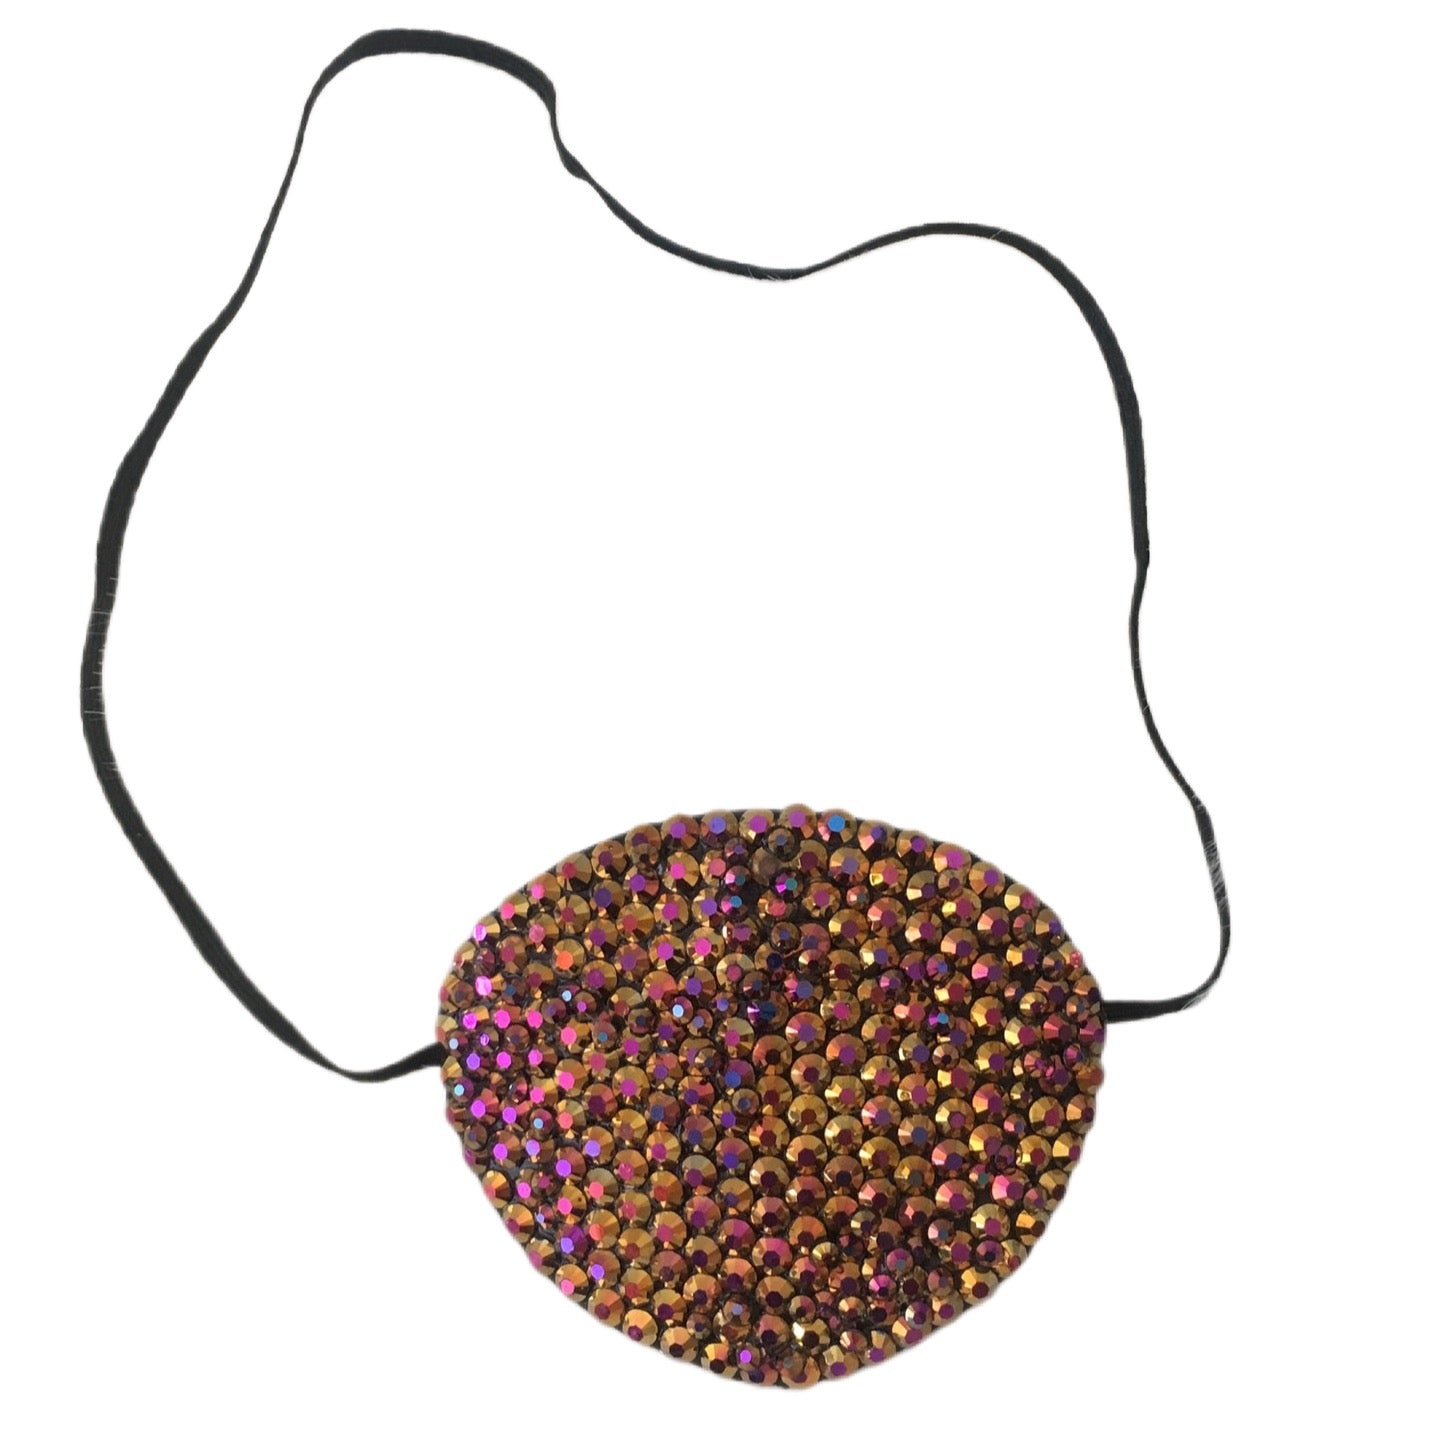 Black Eye Patch Bedazzled In Volcano Crystals